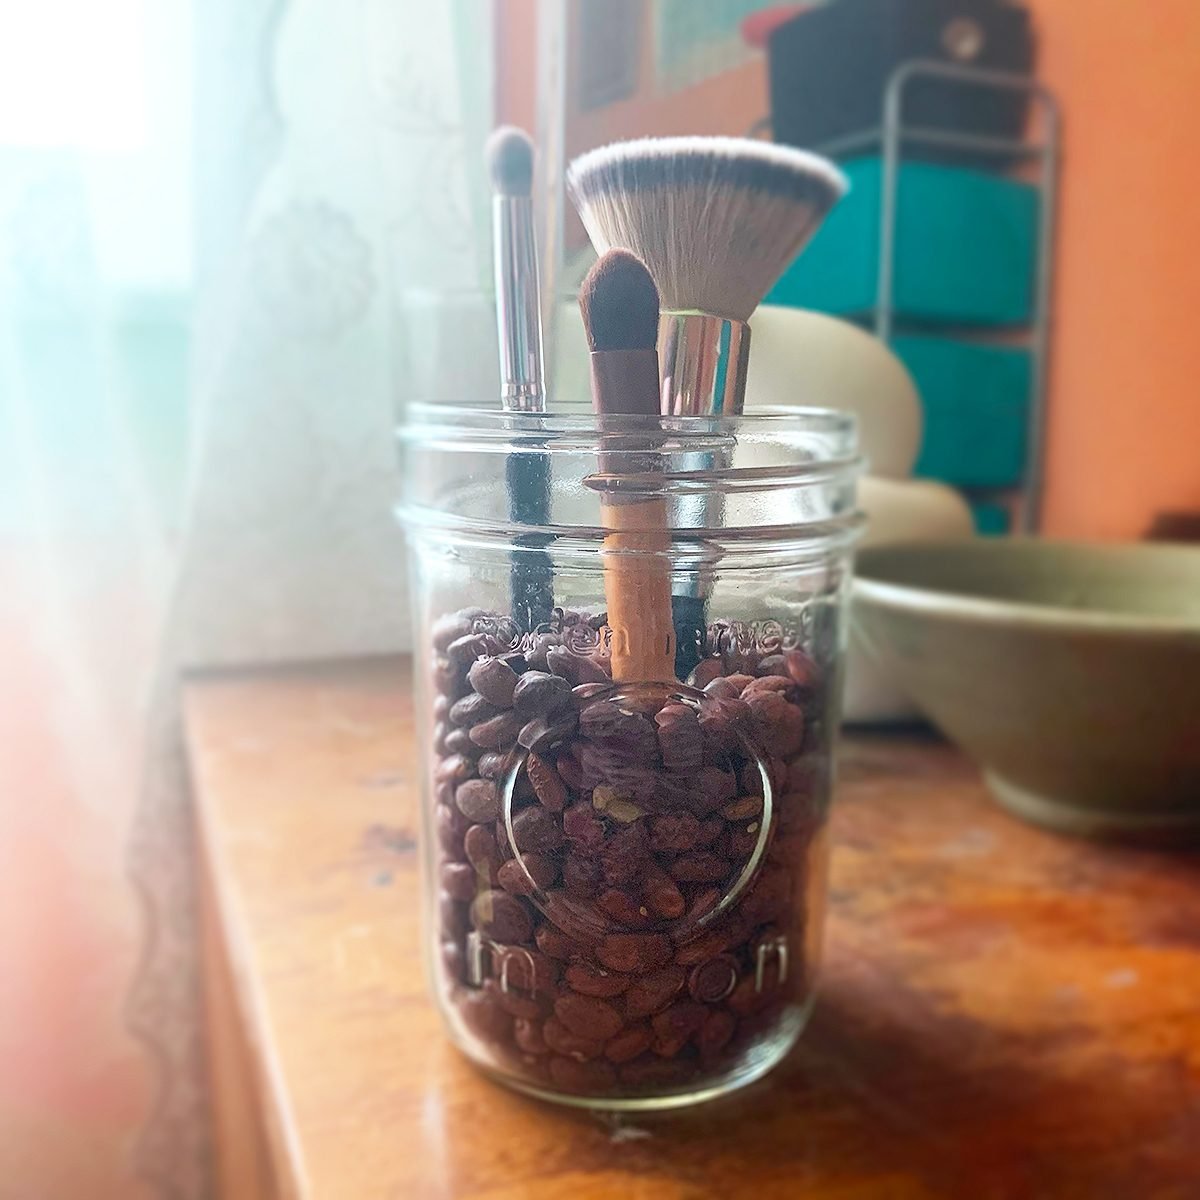 Dried beans as makeup brush holder